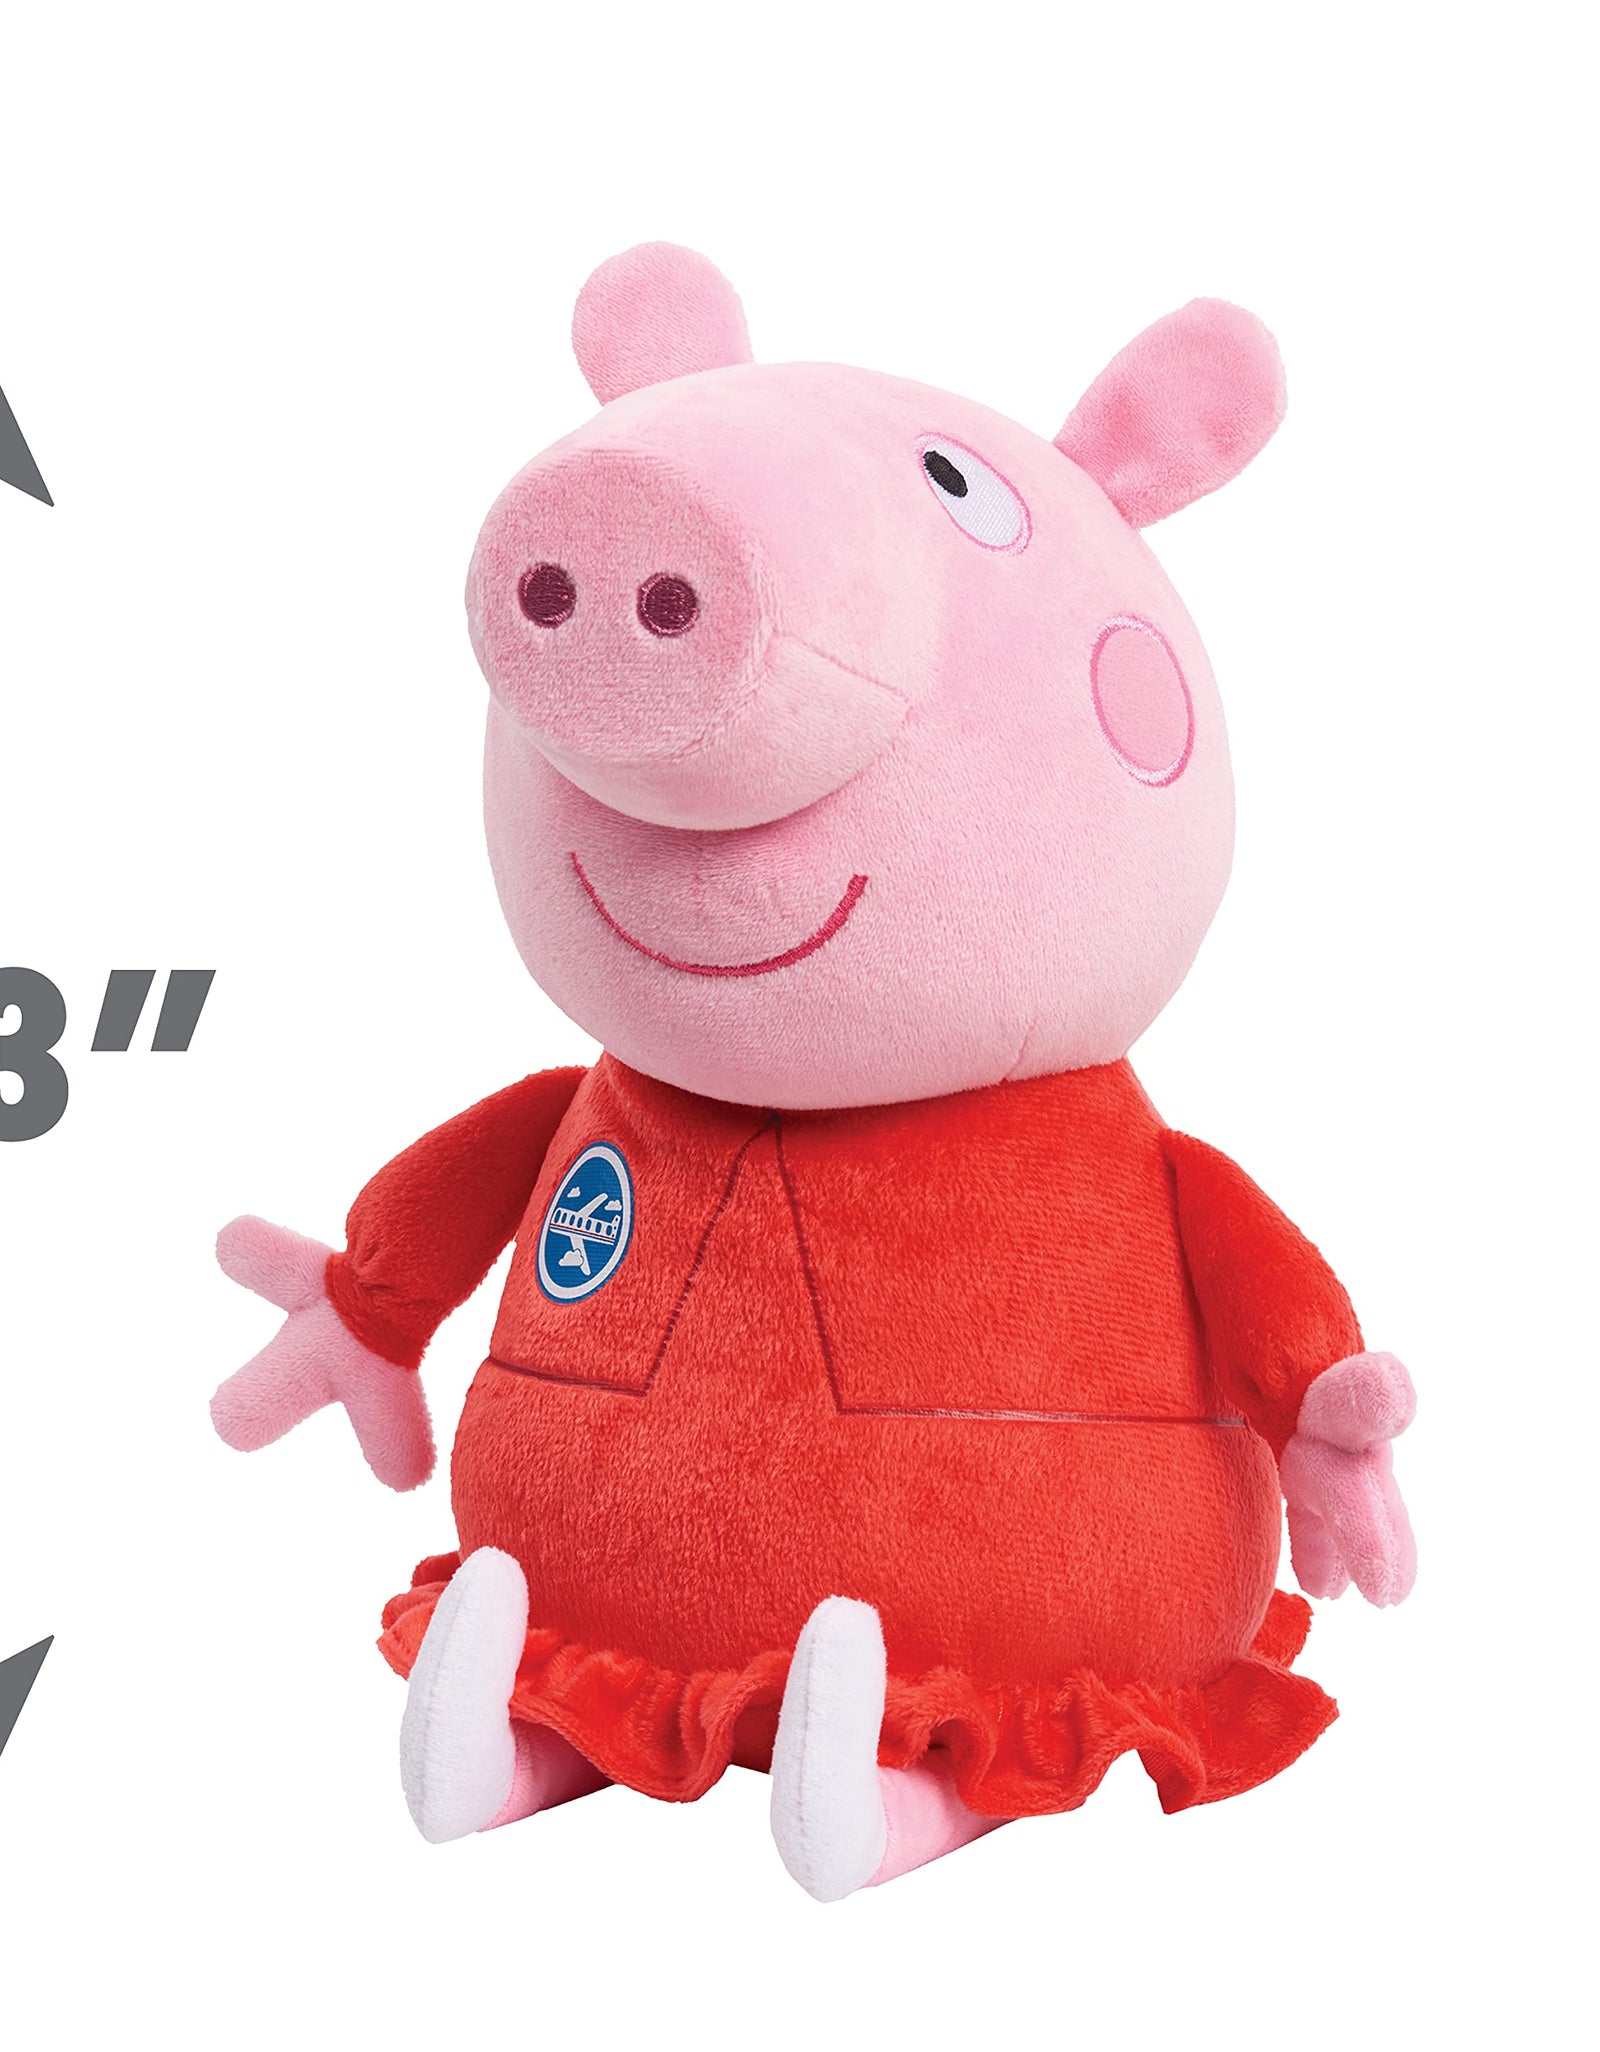 Peppa Pig 13.5-Inch Tourist Peppa Pig Plush, Super Soft & Cuddly Stuffed Animal, Amazon Exclusive, by Just Play